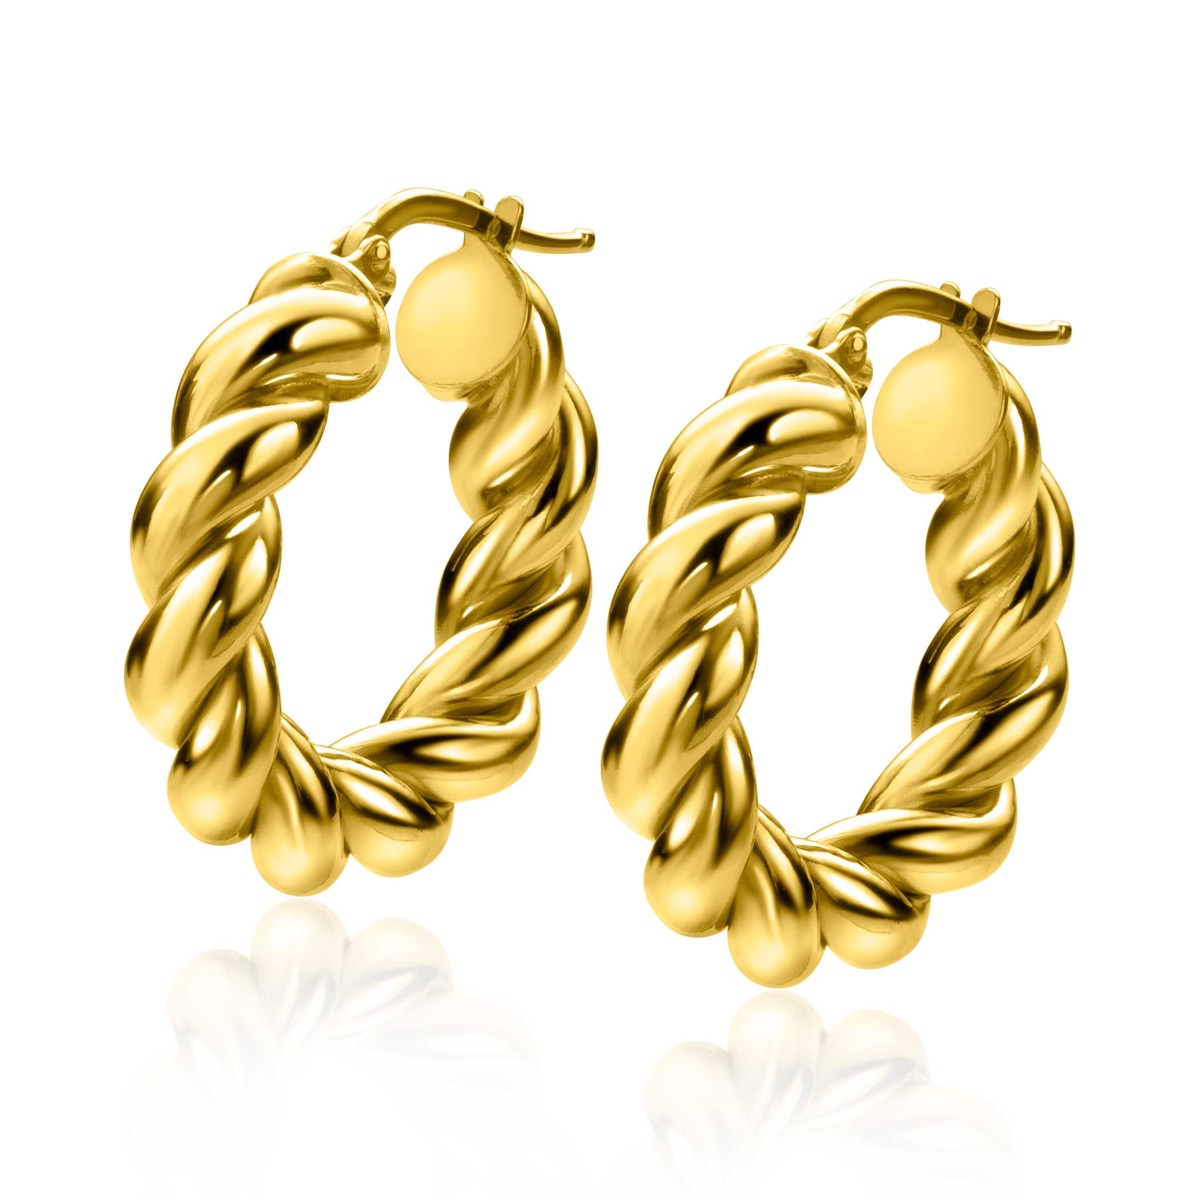 27mm ZINZI Gold Plated Sterling Silver Hoop Earrings with Twisted Tube width 6mm ZIO2283G